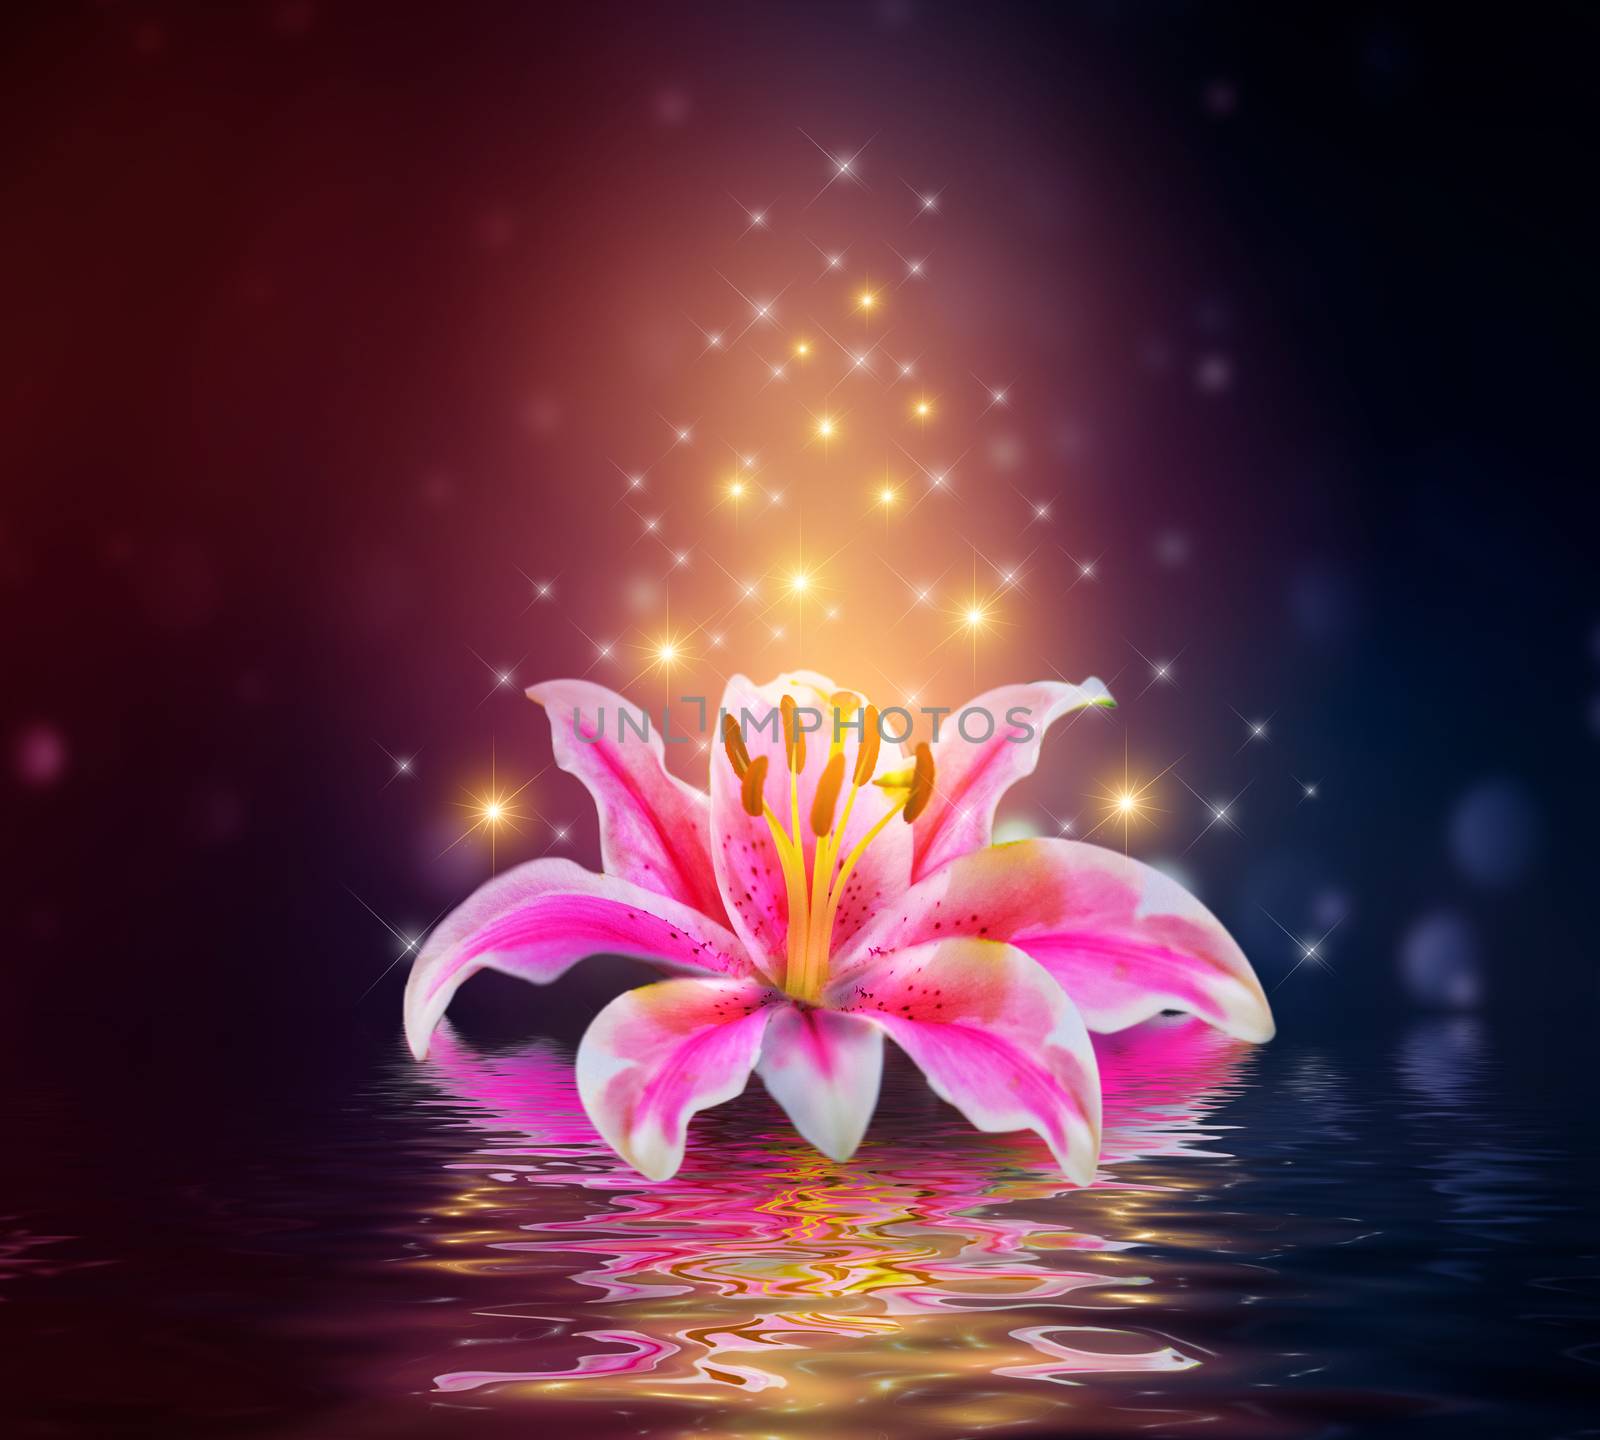 Pink Lilies flower on water reflection by sarayut_thaneerat